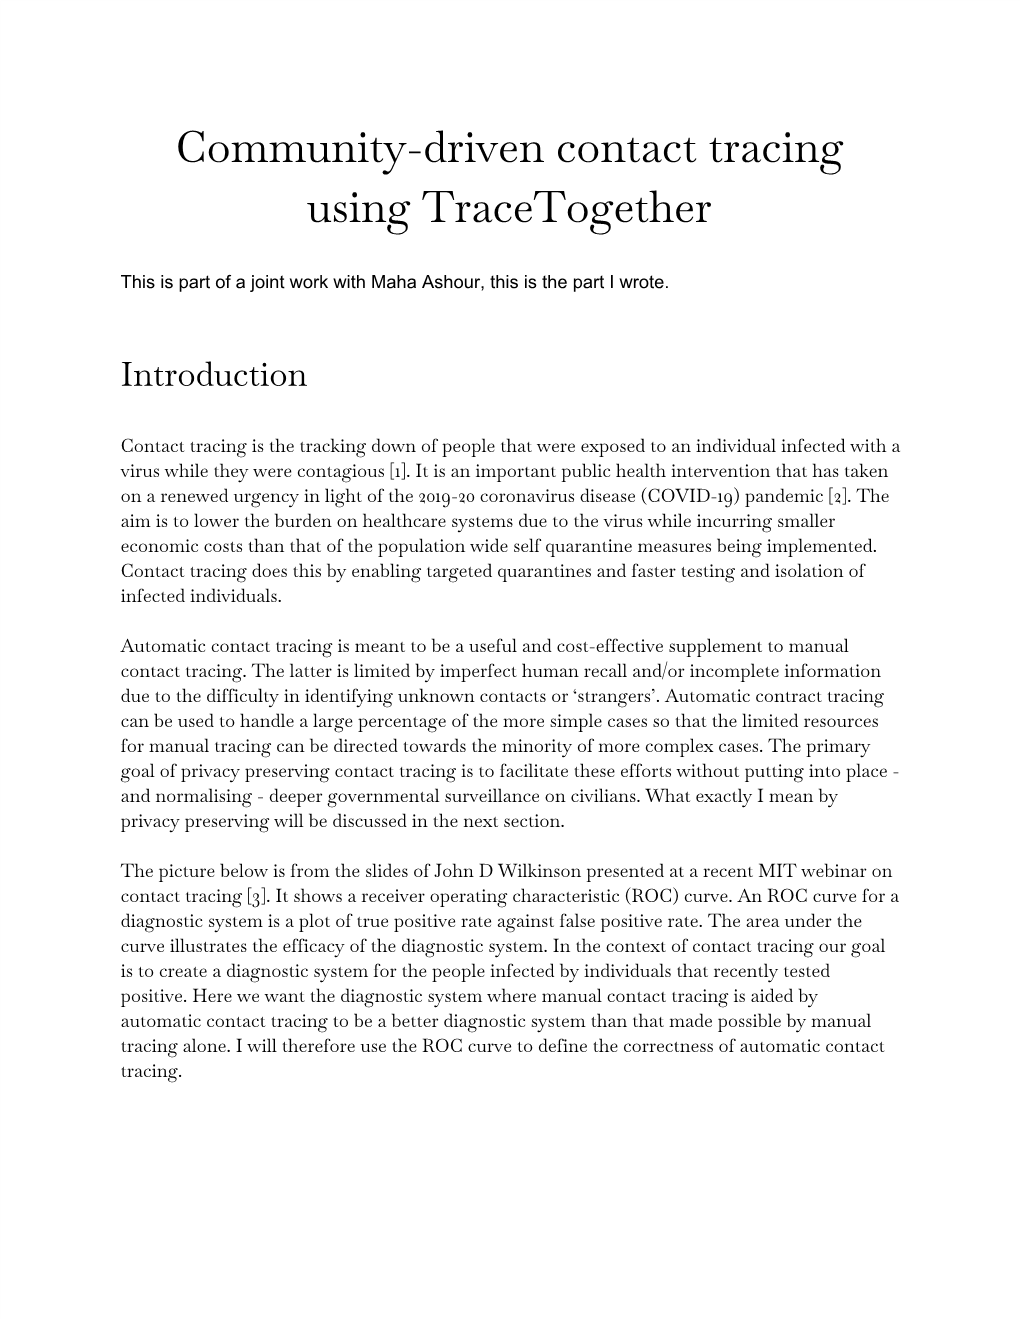 Community-Driven Contact Tracing Using Tracetogether